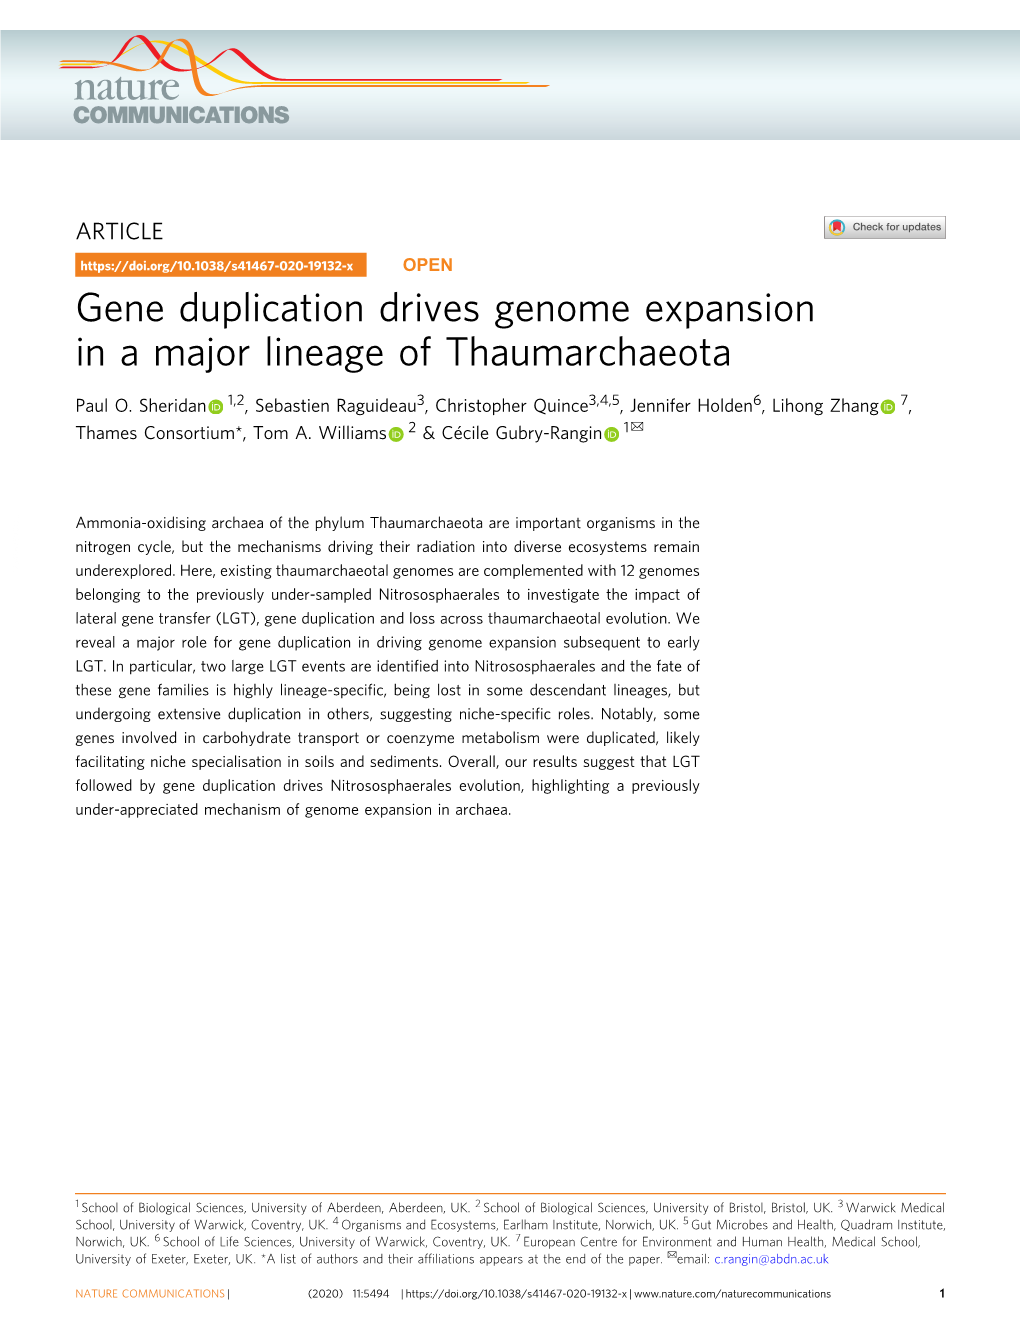 Gene Duplication Drives Genome Expansion in a Major Lineage of Thaumarchaeota